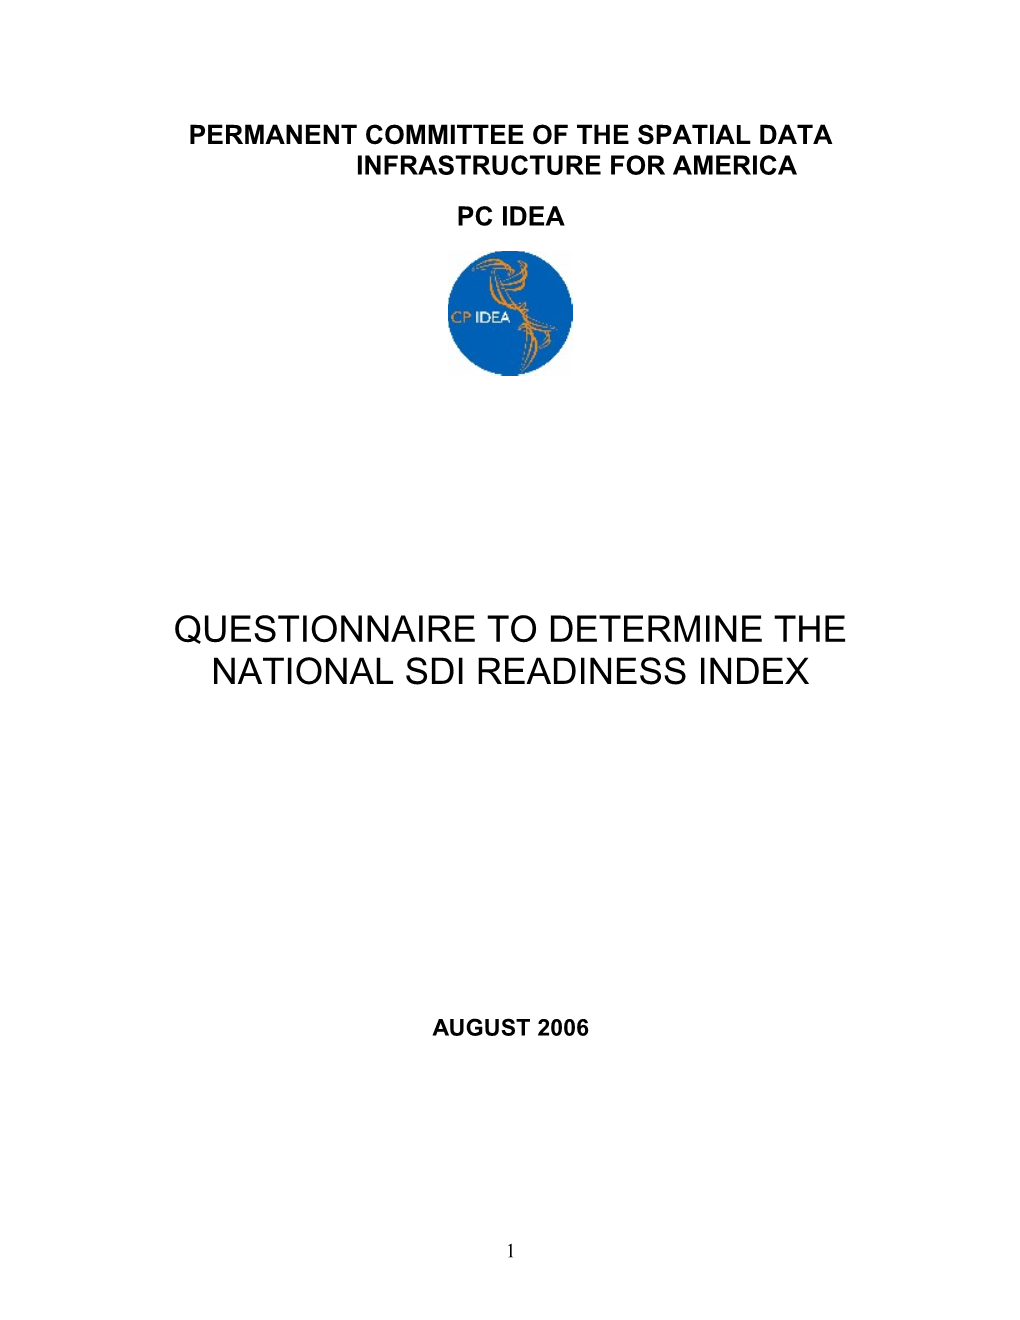 Permanent Committee of the Spatial Data Infrastructure for America